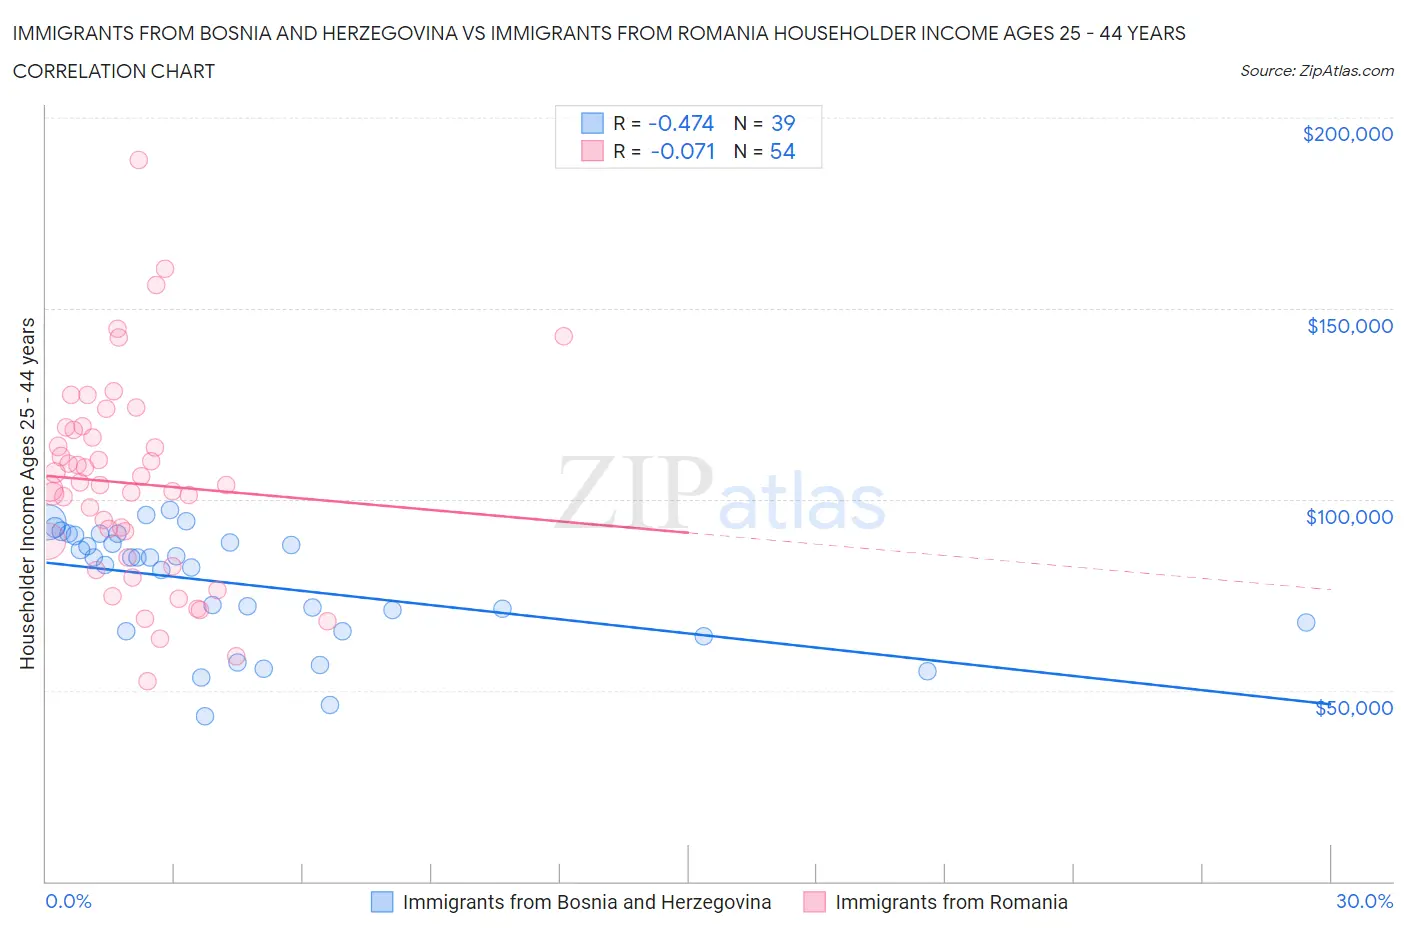 Immigrants from Bosnia and Herzegovina vs Immigrants from Romania Householder Income Ages 25 - 44 years